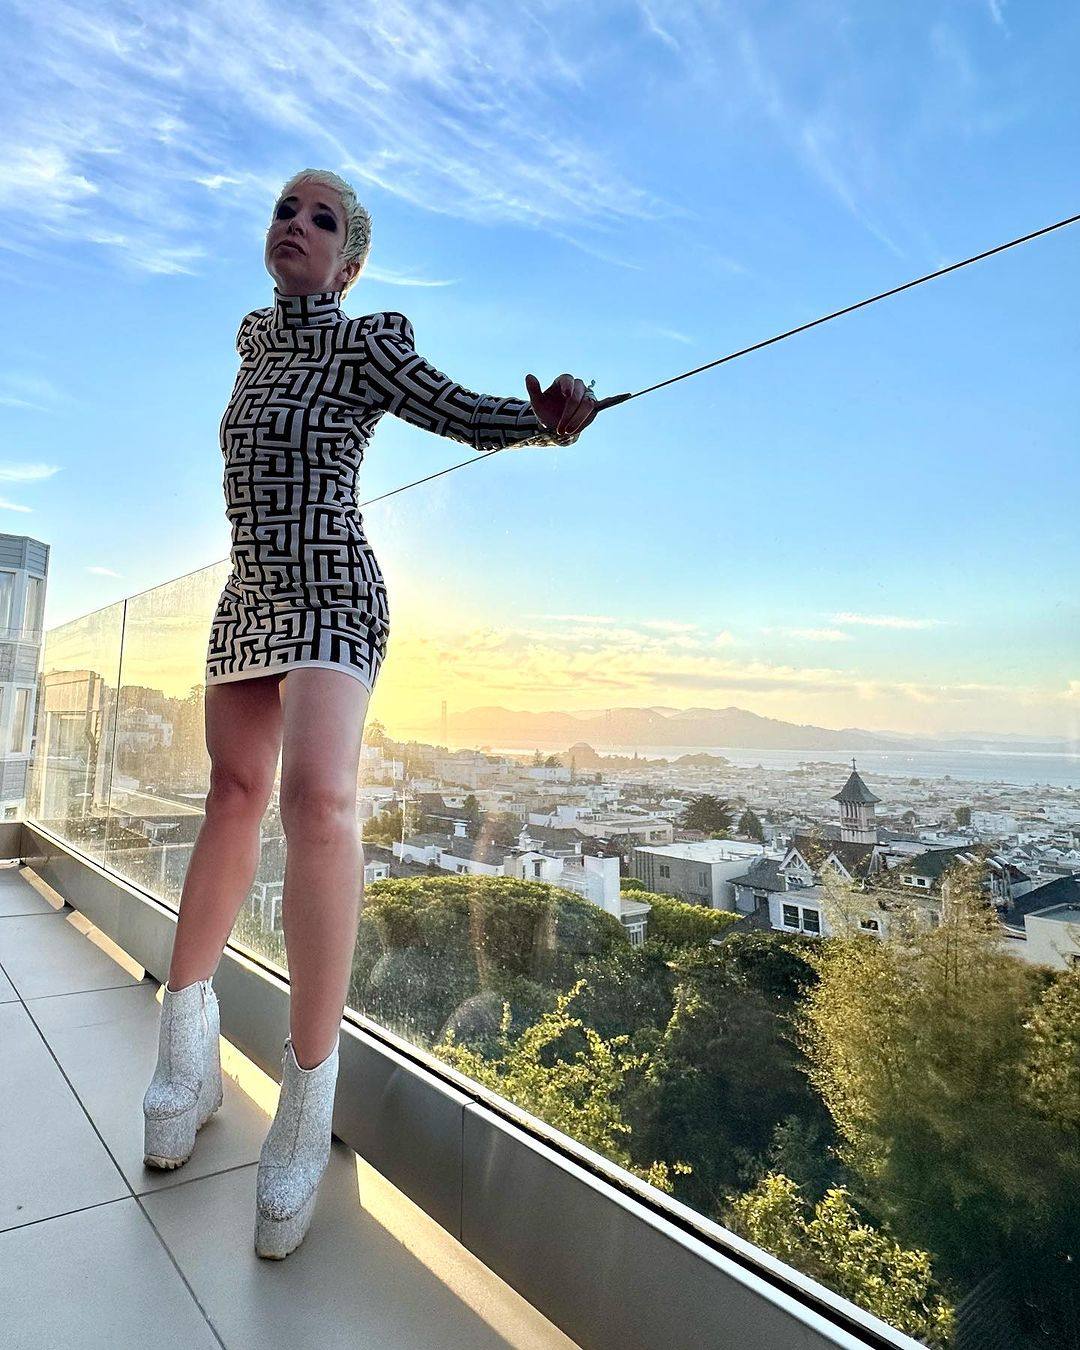 Lisa Archbold claimed the Delta agent said her attire was “revealing” and that airline policy was not to allow passengers dressed that way to travel. Photo: Instagram/djette_kiwi